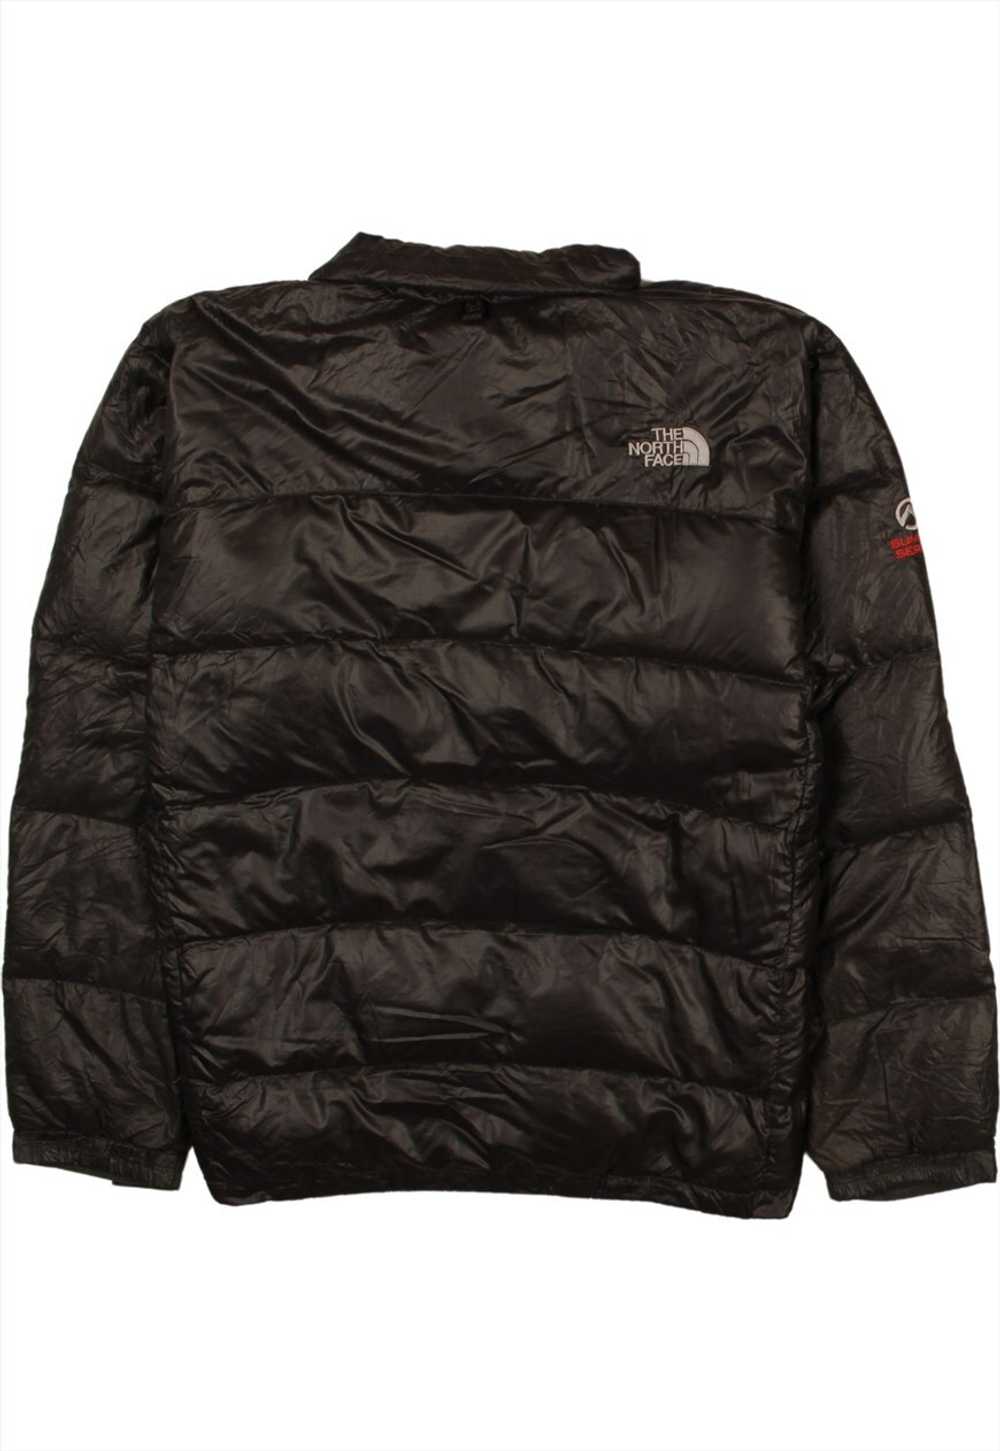 Vintage 90's The North Face Puffer Jacket Heavywe… - image 2